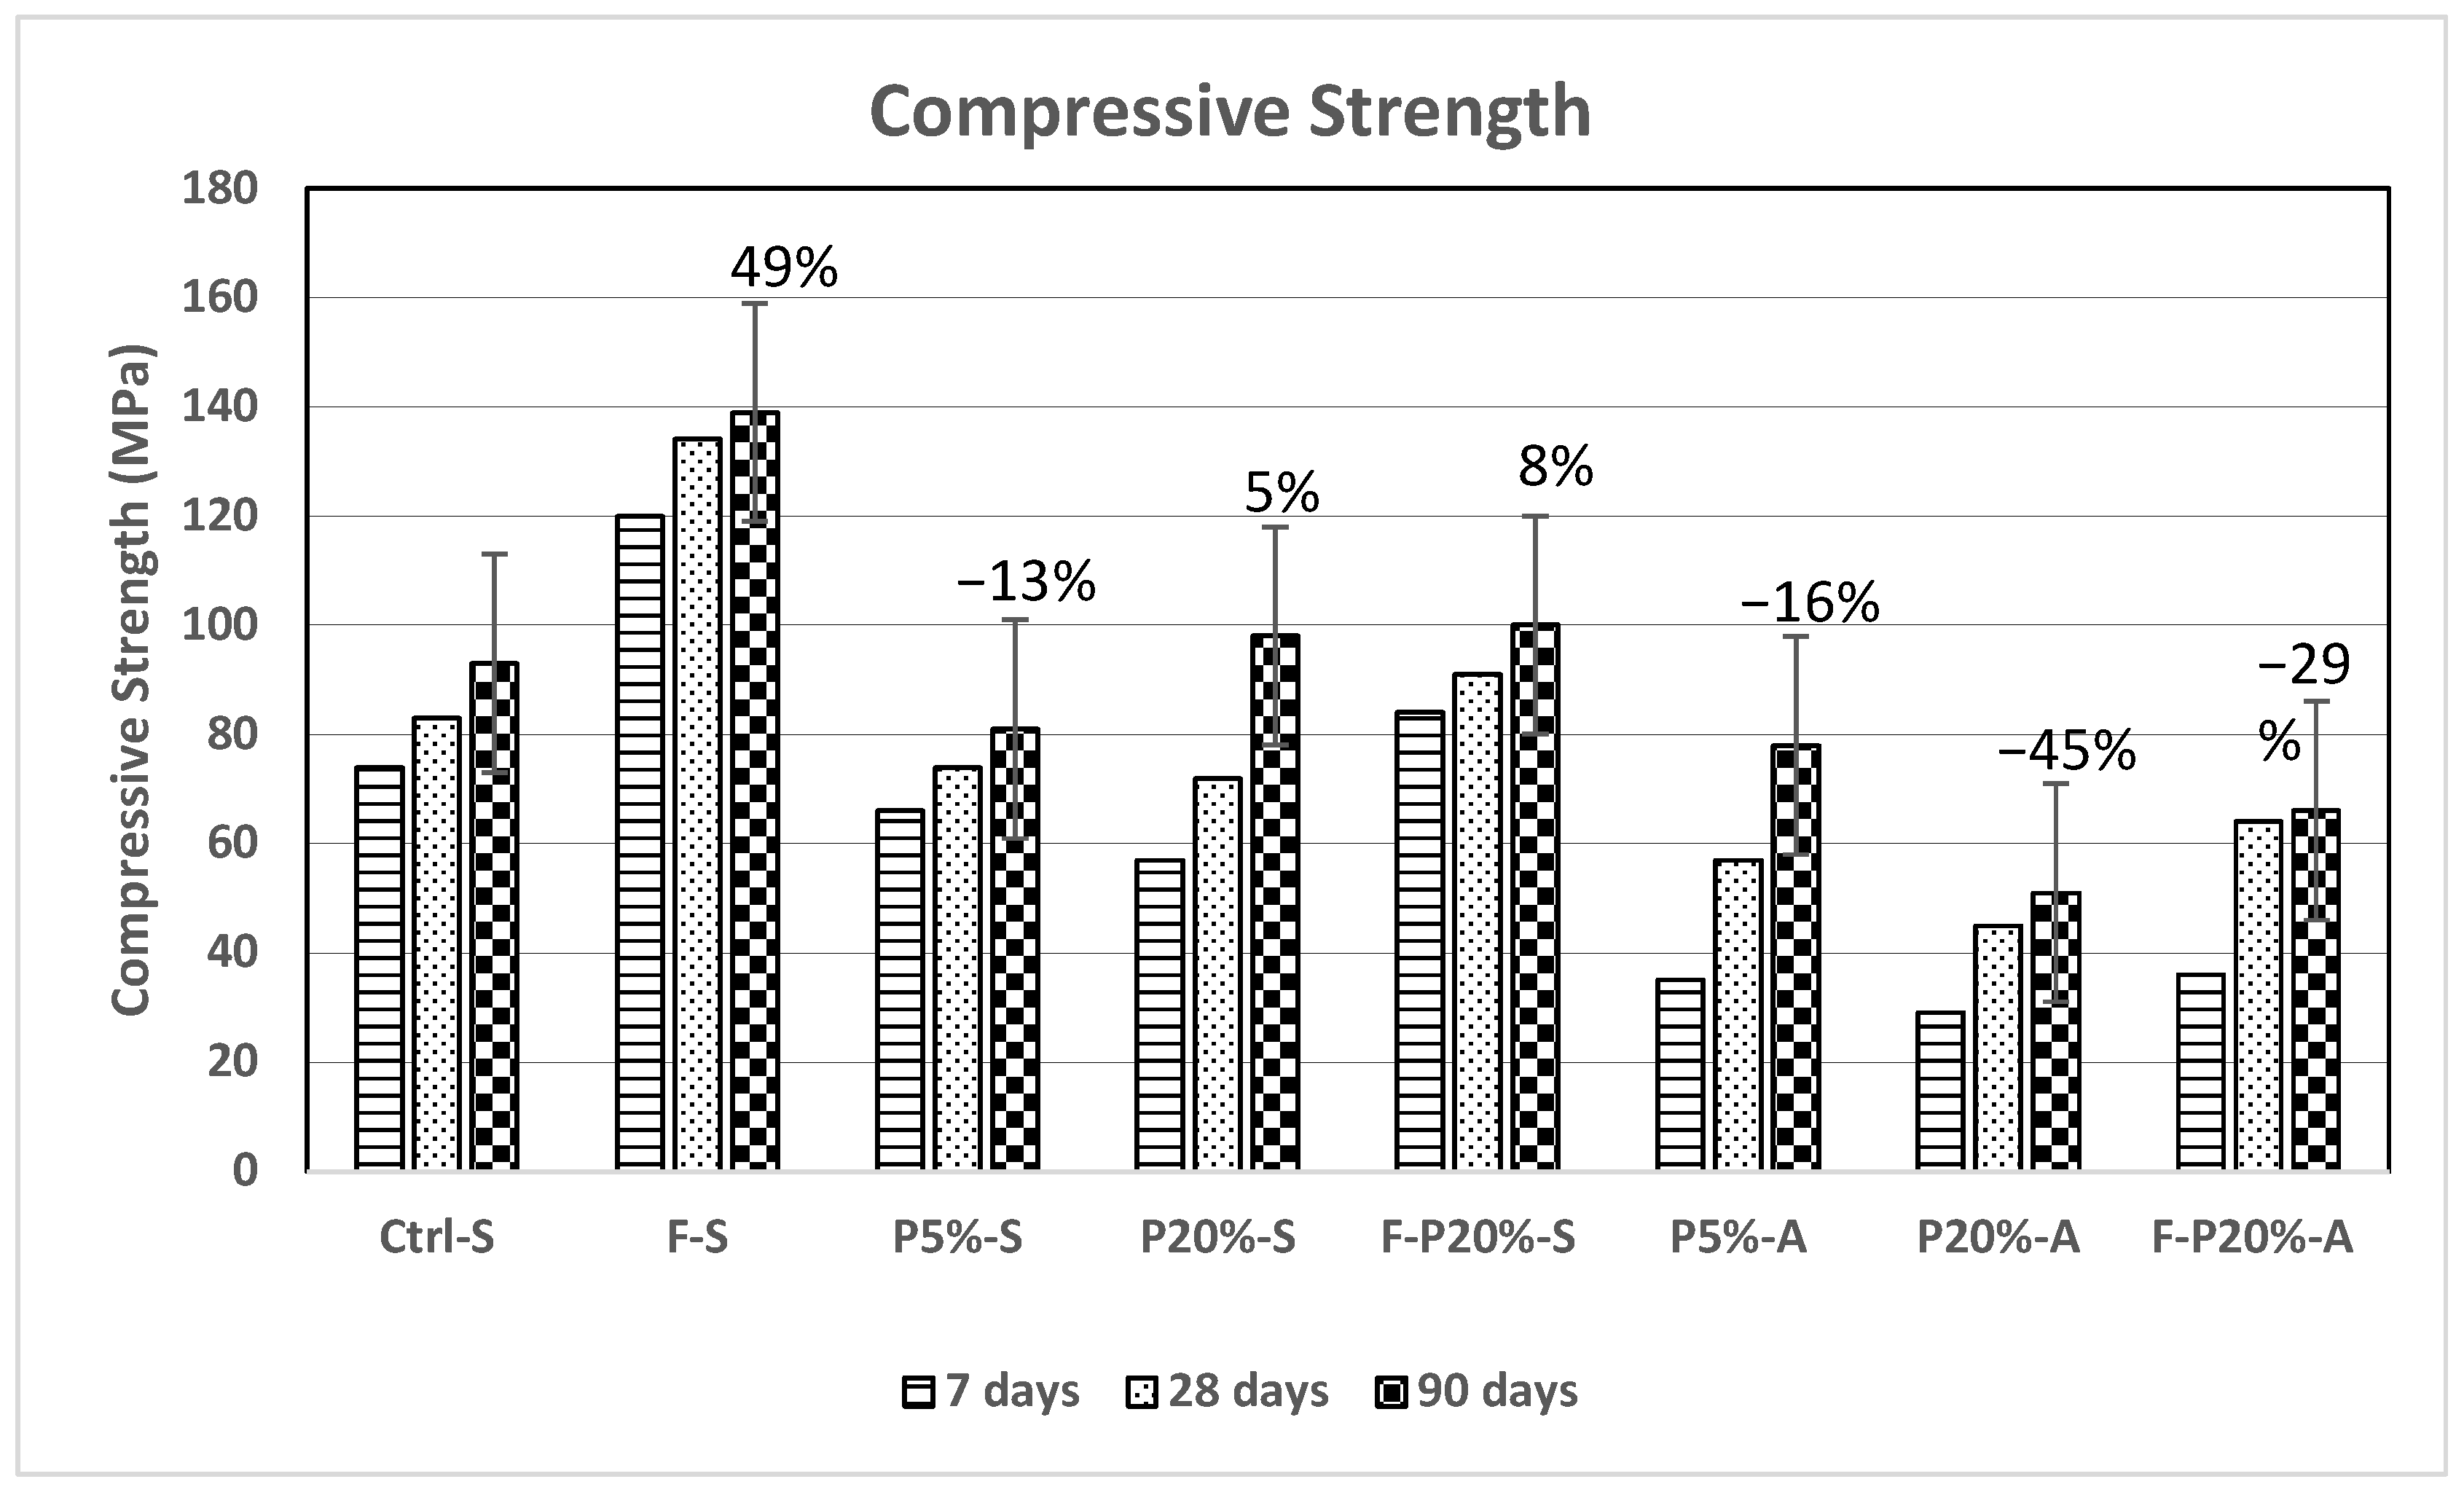 Compressive Strength of High Performance Concrete at the age of 28